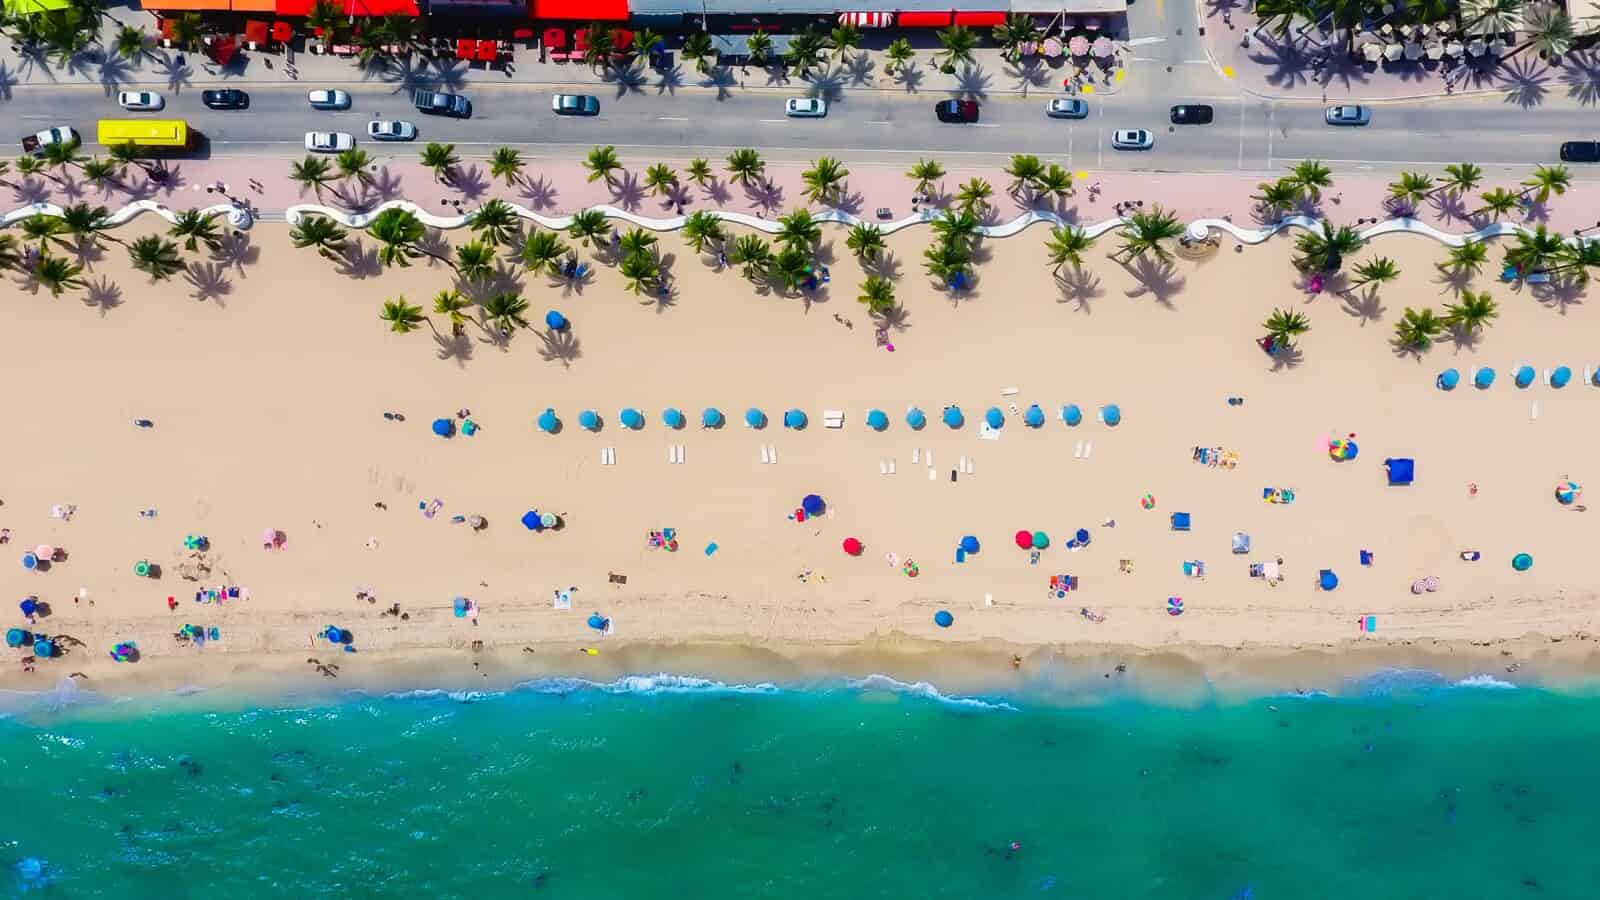 Best place to stay in Fort Lauderdale without a car